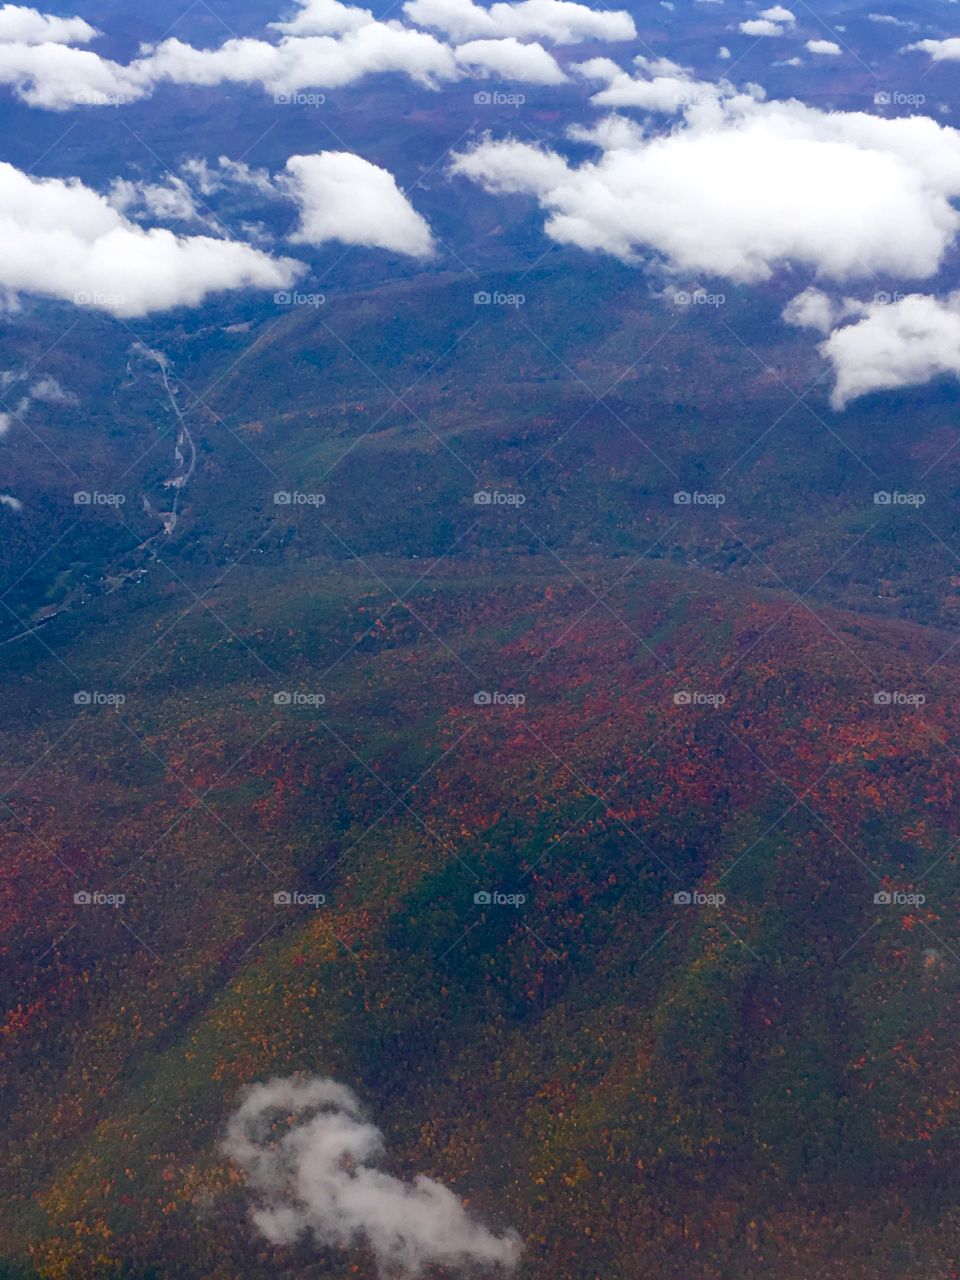 Another beautiful shot of the colors of the fall in upstate NY from above.